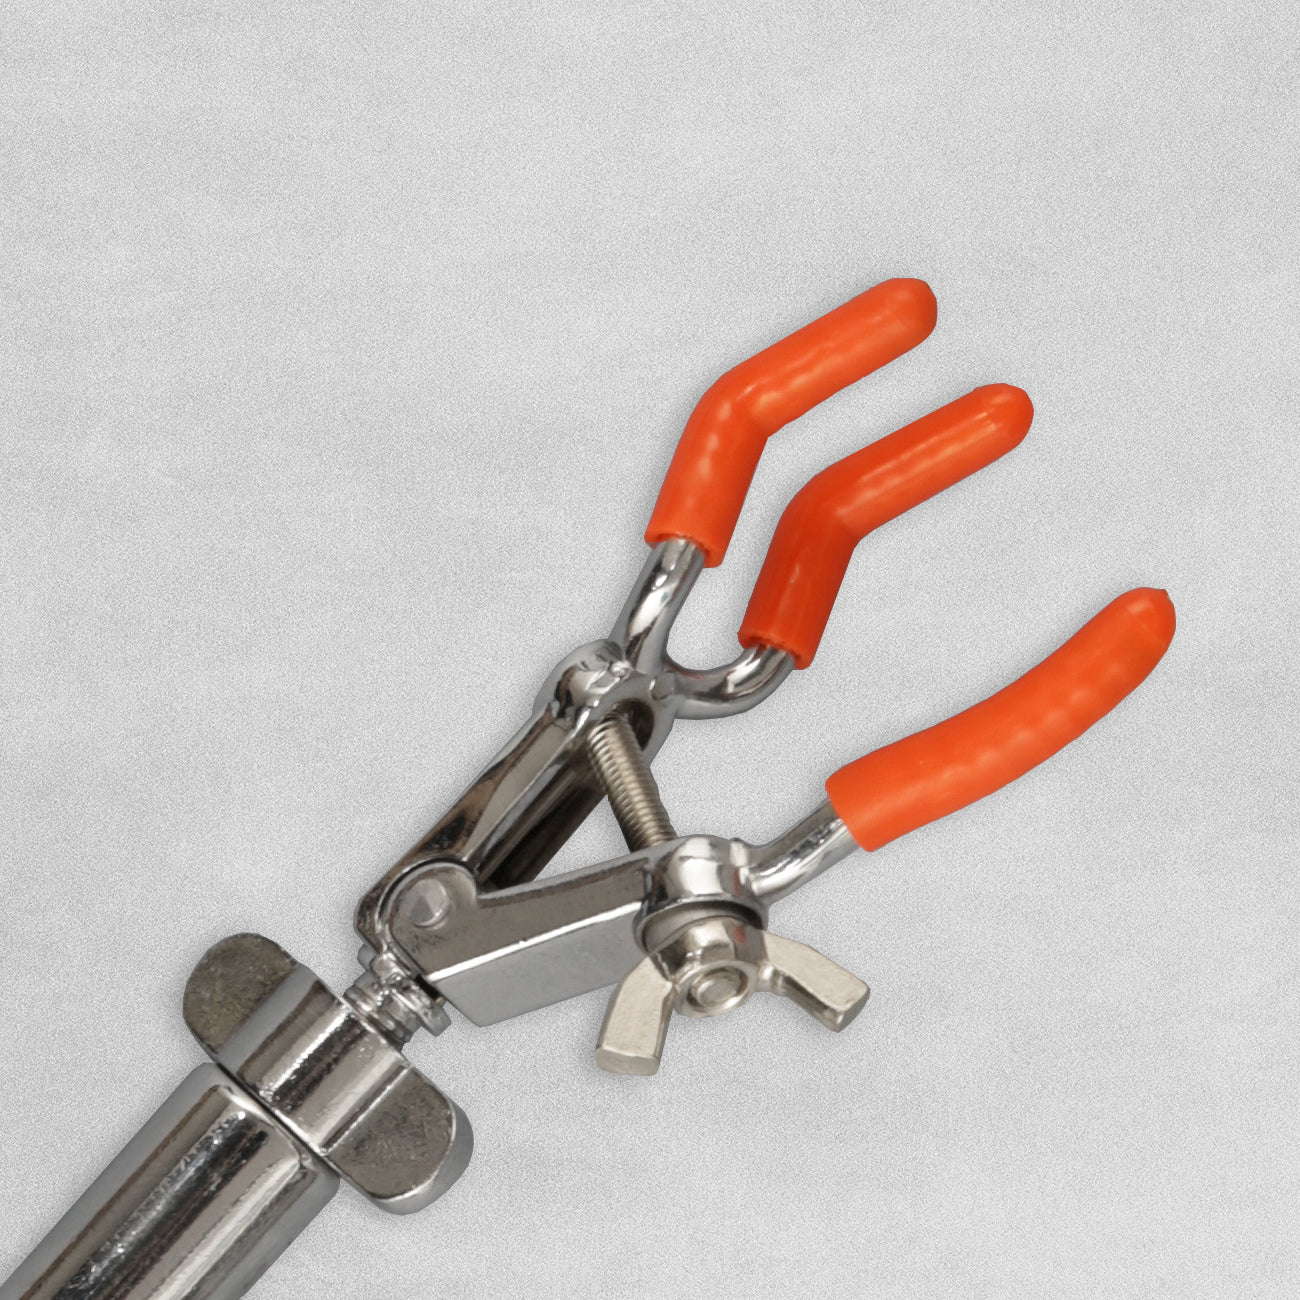 Three Finger Clamps with Rubber Coating